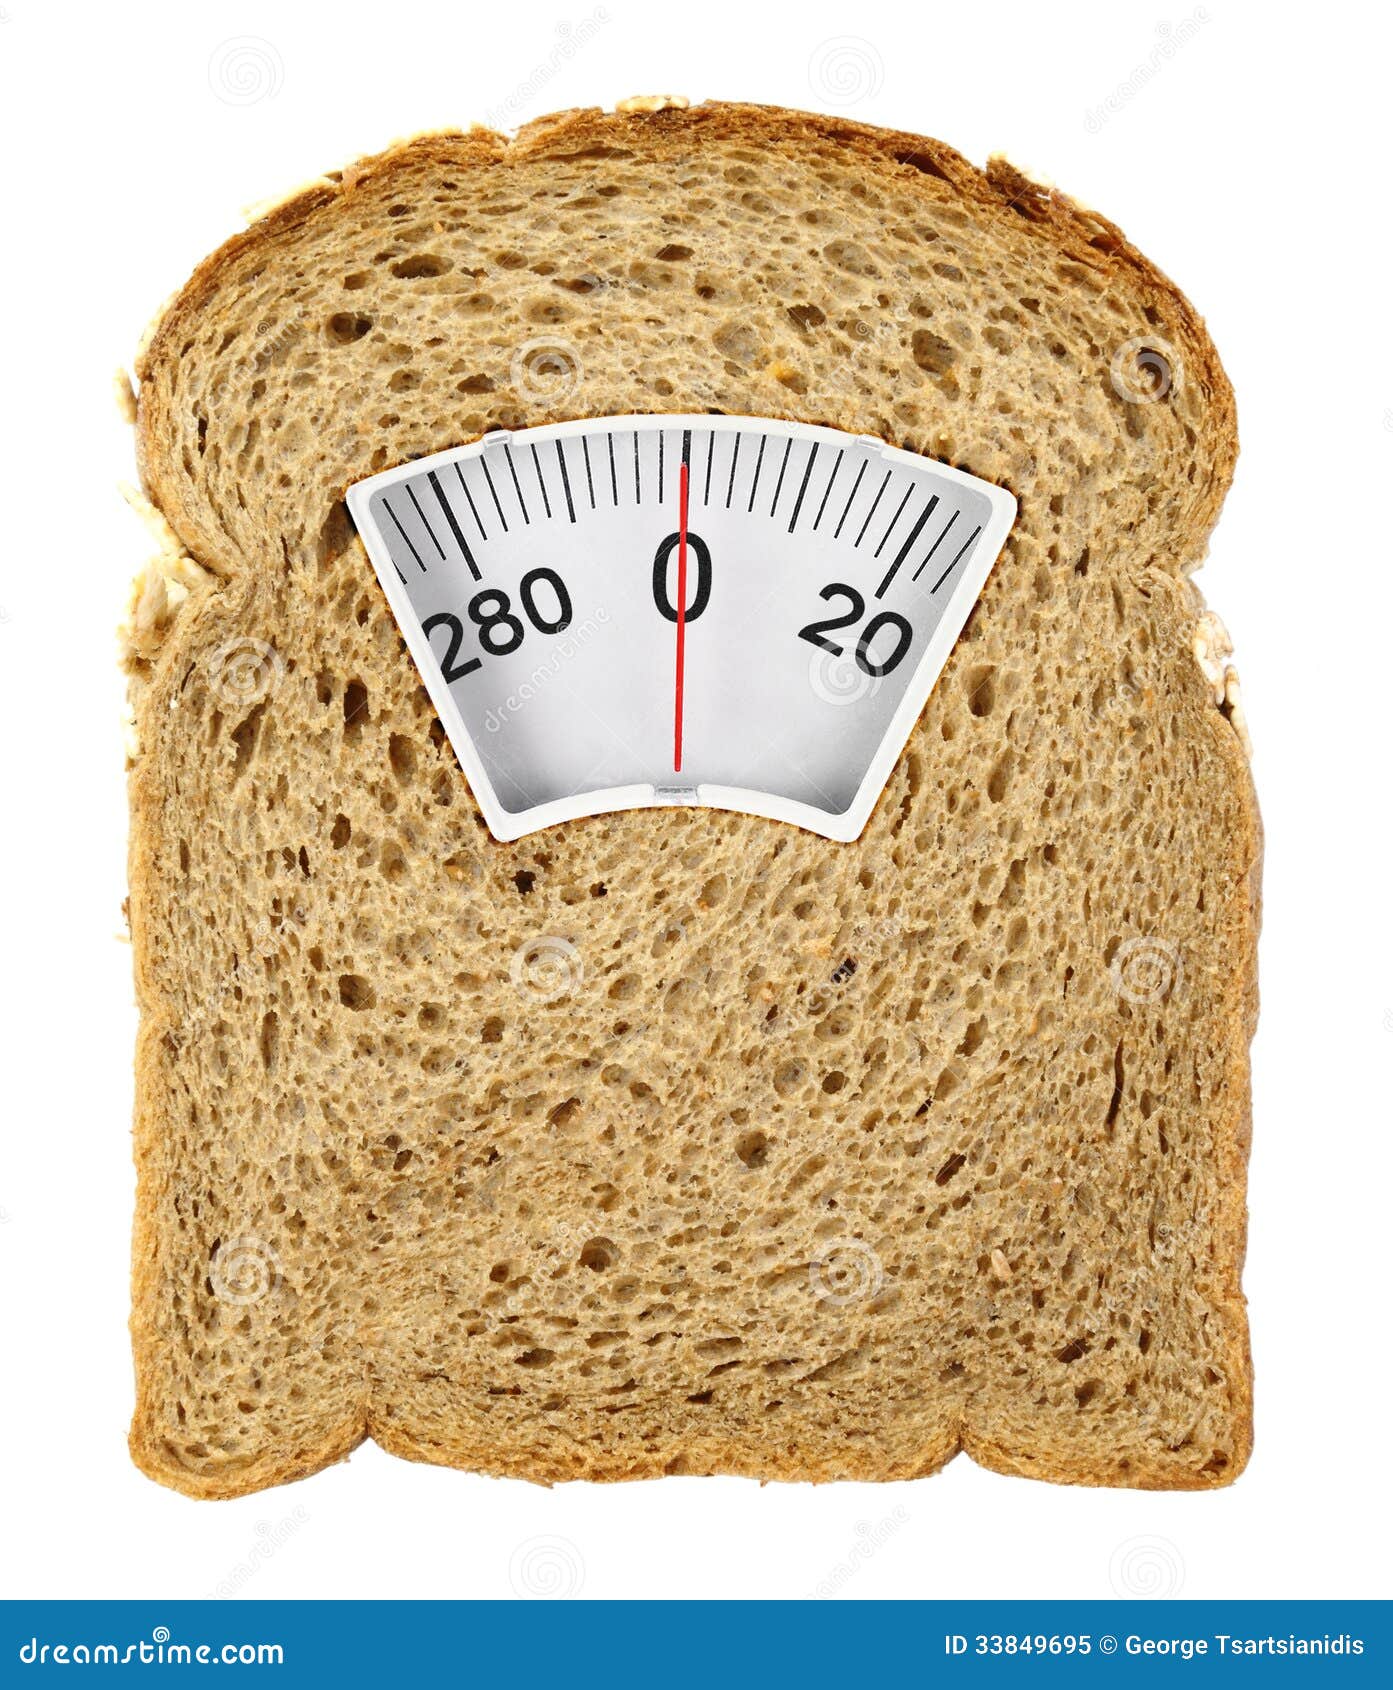 wholesome slice of bread as weighing scale